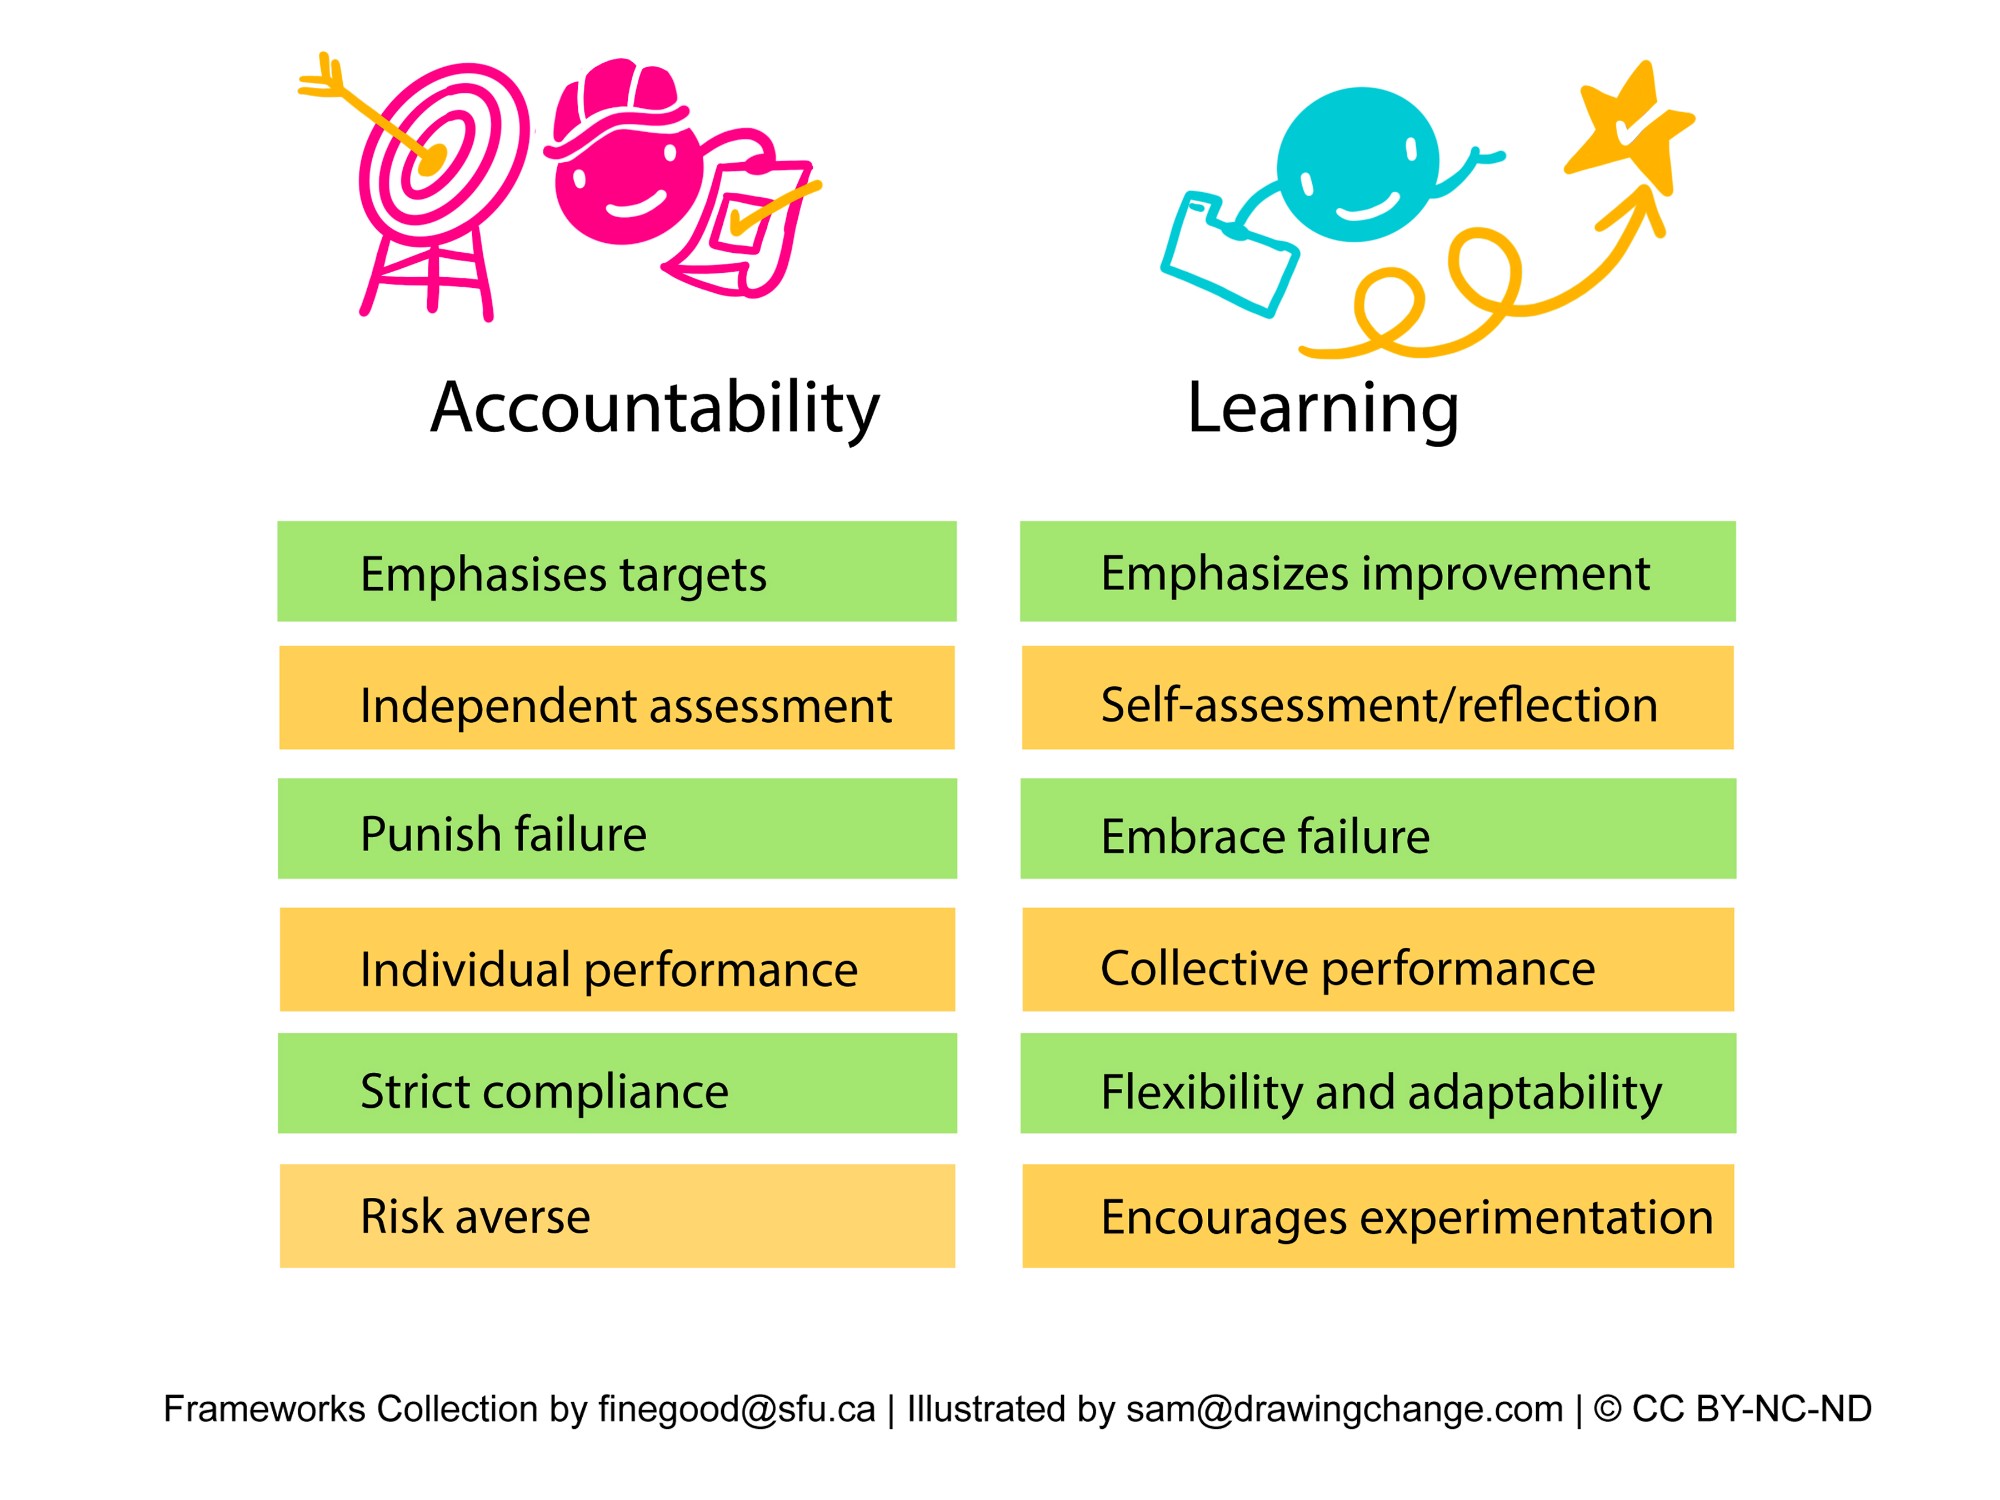 This is an image of a comparison table with two columns titled "Accountability" and "Learning". Each column has a corresponding icon: "Accountability" features an icon of a smiling figure wearing a hard hat and holding a checklist, with a target board behind them. "Learning" displays an icon of a joyful figure bouncing on a spring, holding a clipboard, with a star above them. Below the icons, there are six pairs of contrasting phrases in colored bars.  The "Accountability" side has bars with the following phrases: - Emphasises targets - Independent assessment - Punish failure - Individual performance - Strict compliance - Risk averse  The "Learning" side has bars with these phrases: - Emphasizes improvement - Self-assessment/reflection - Embrace failure - Collective performance - Flexibility and adaptability - Encourages experimentation  At the bottom, the image credits read: "Frameworks Collection by finegood@sfu.ca | Illustrated by sam@drawingchange.com | © CC BY-NC-ND".